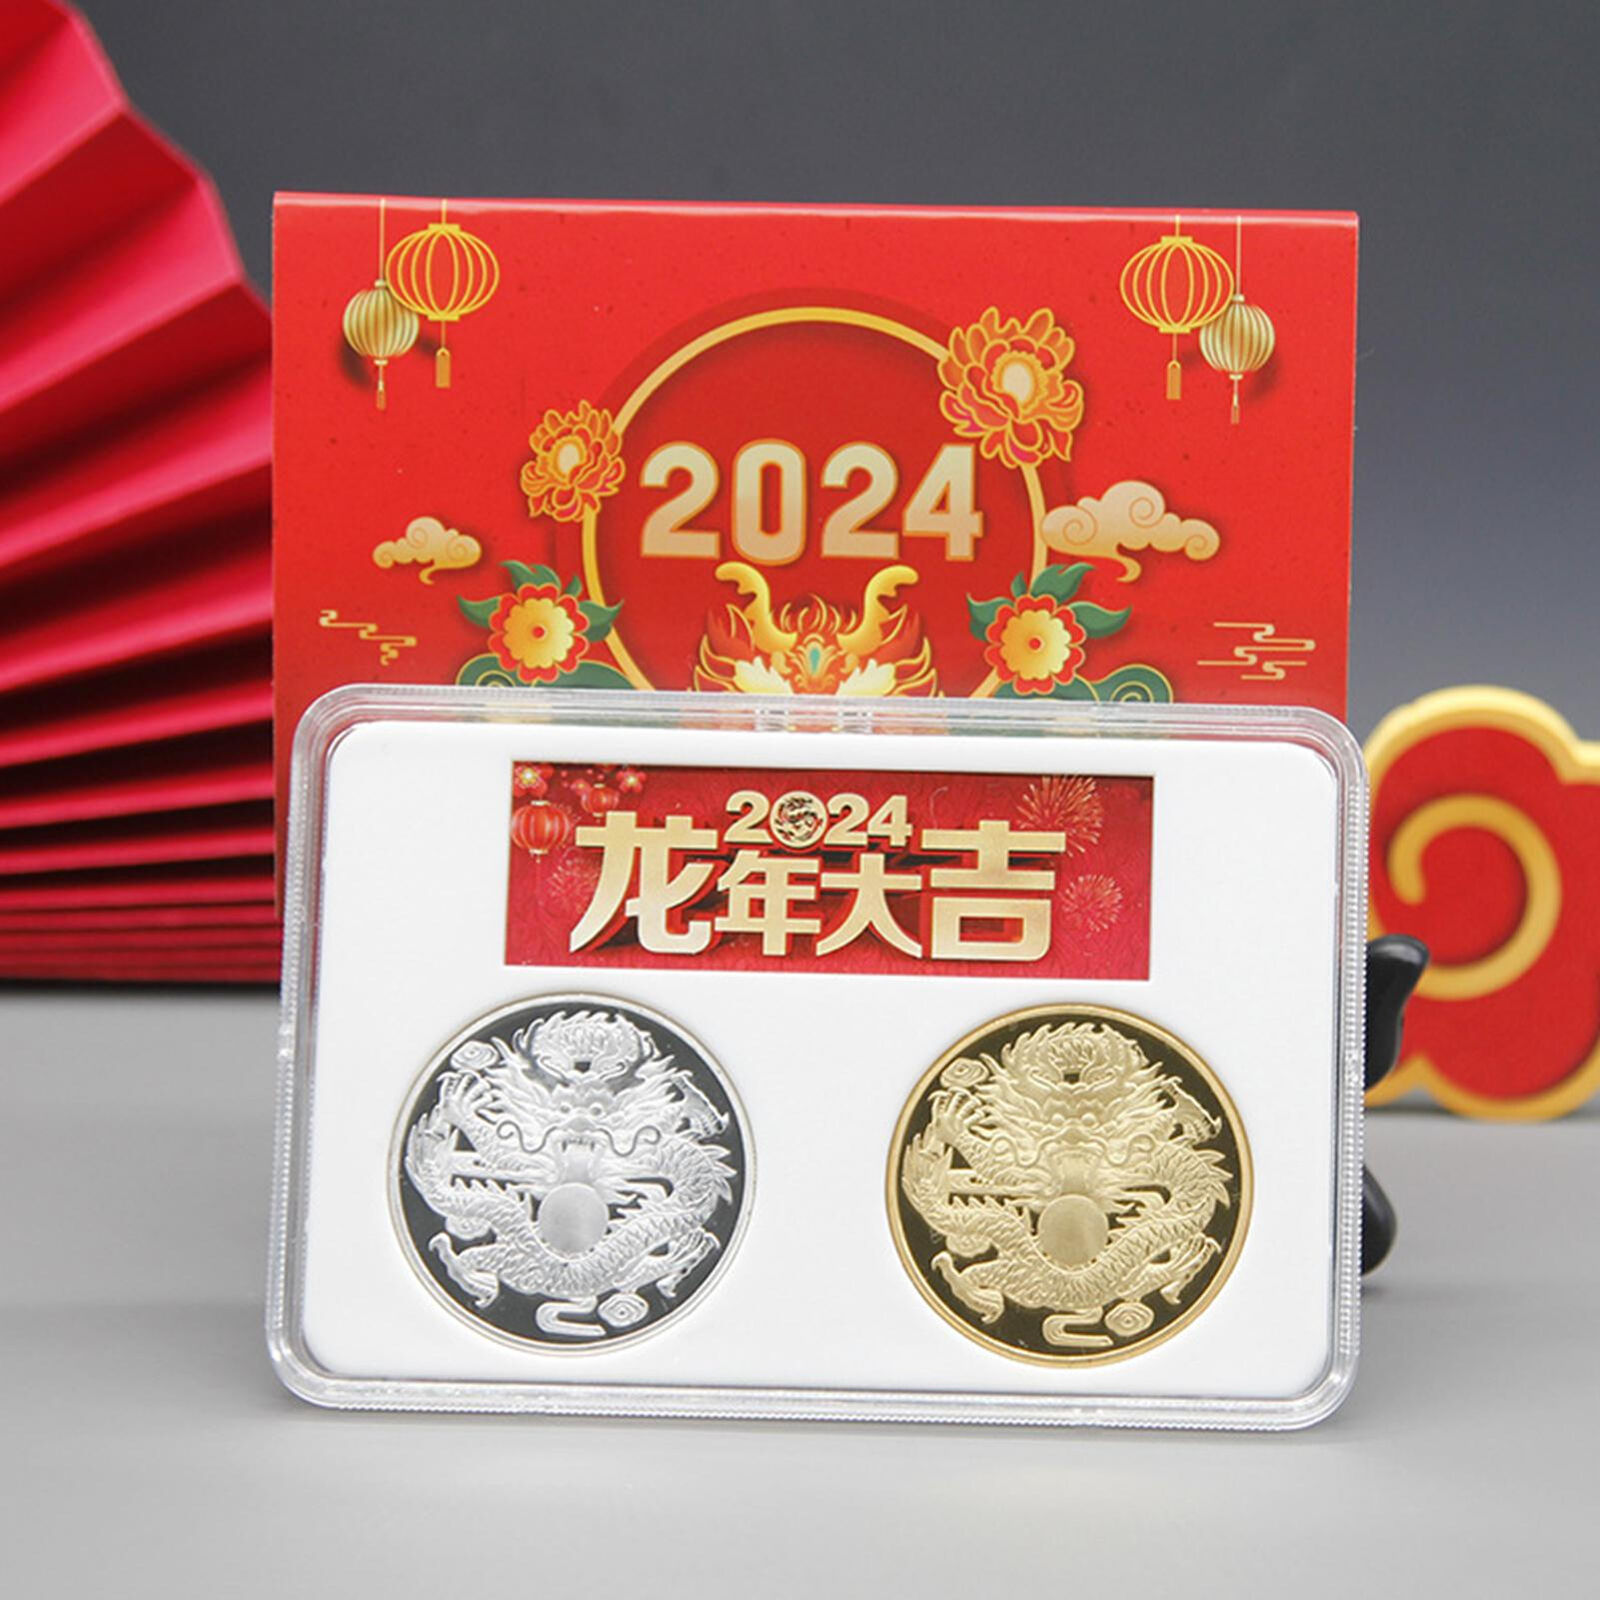 2pcs 2024 Chinese Coin Dragon Gold Coin Collectible Silver Coin For New Year